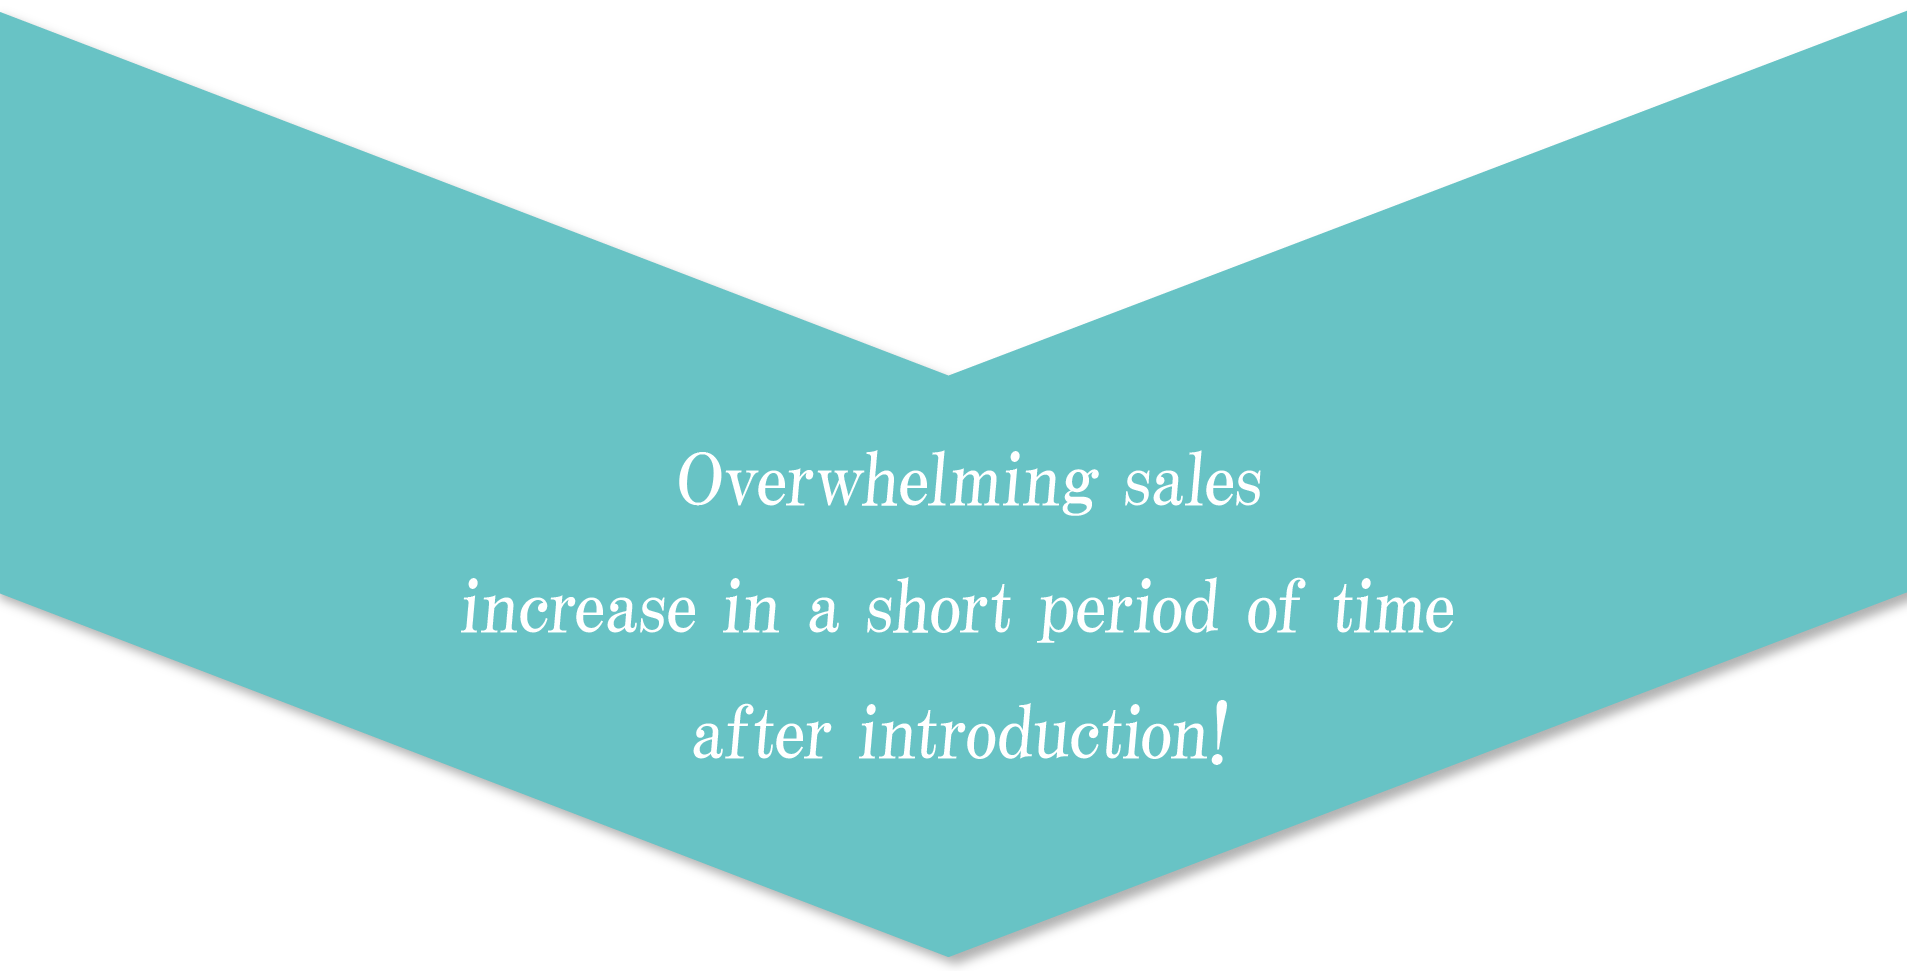 Overwhelming sales increase in a short period of time after introduction!